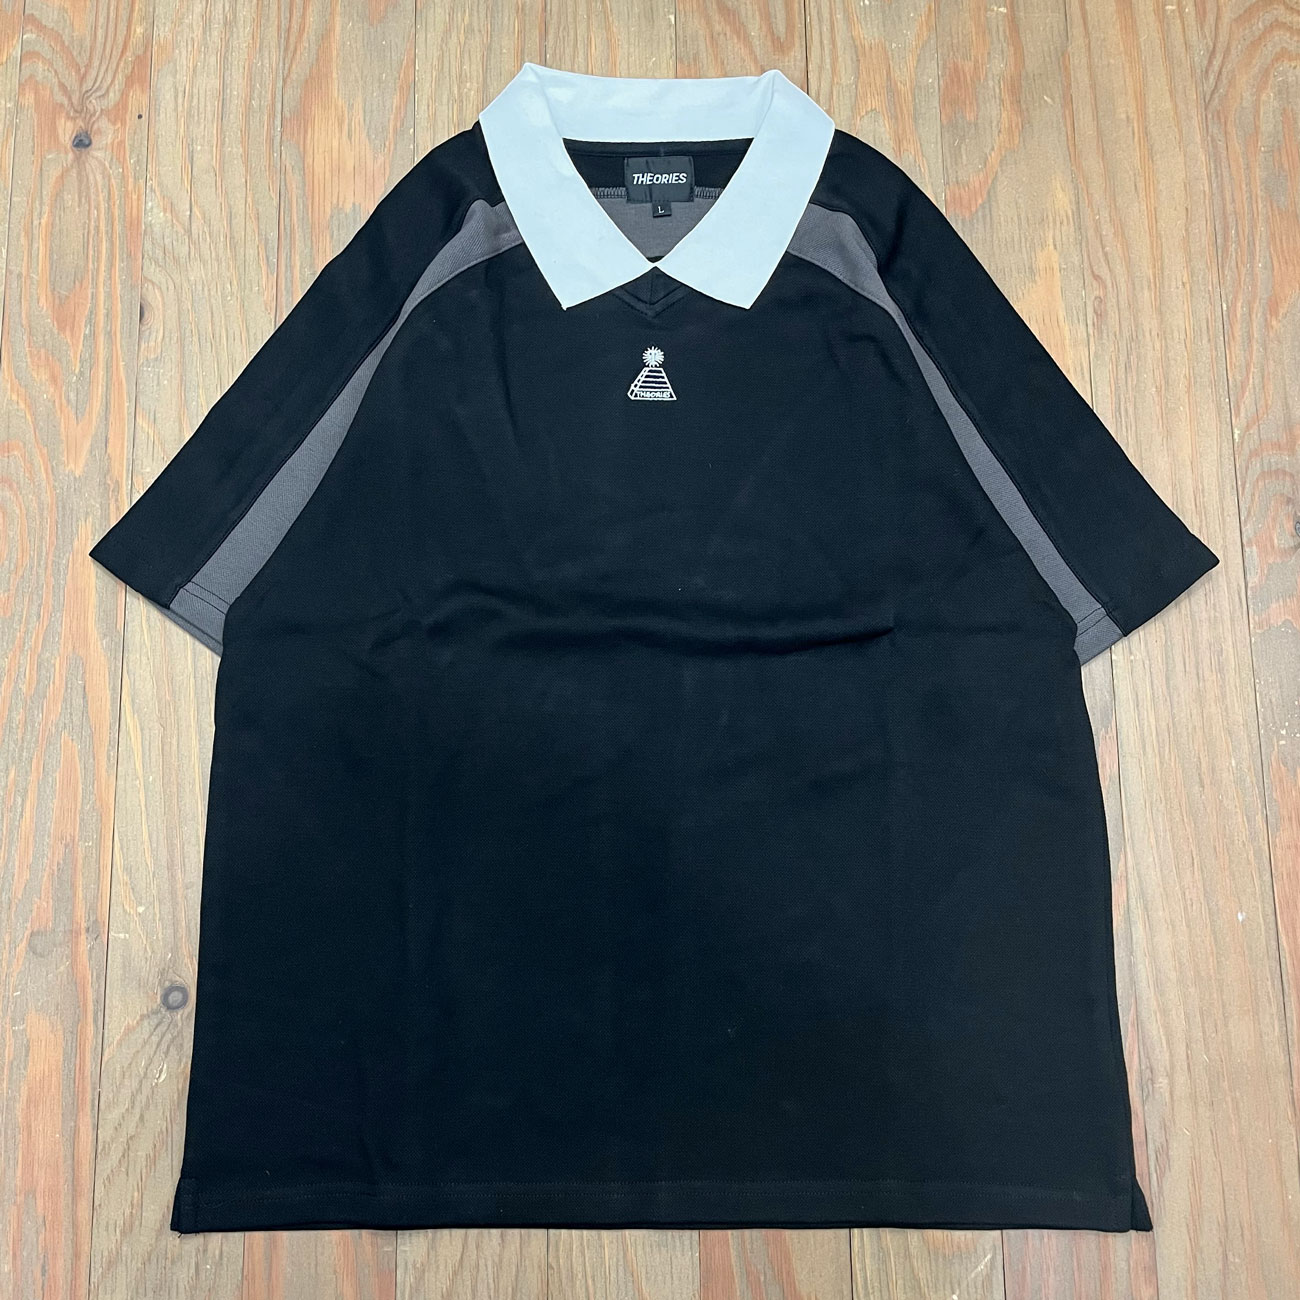 【POP UP】THEORIES MIDFIELD PIQUE S/S POLO SHIRTS